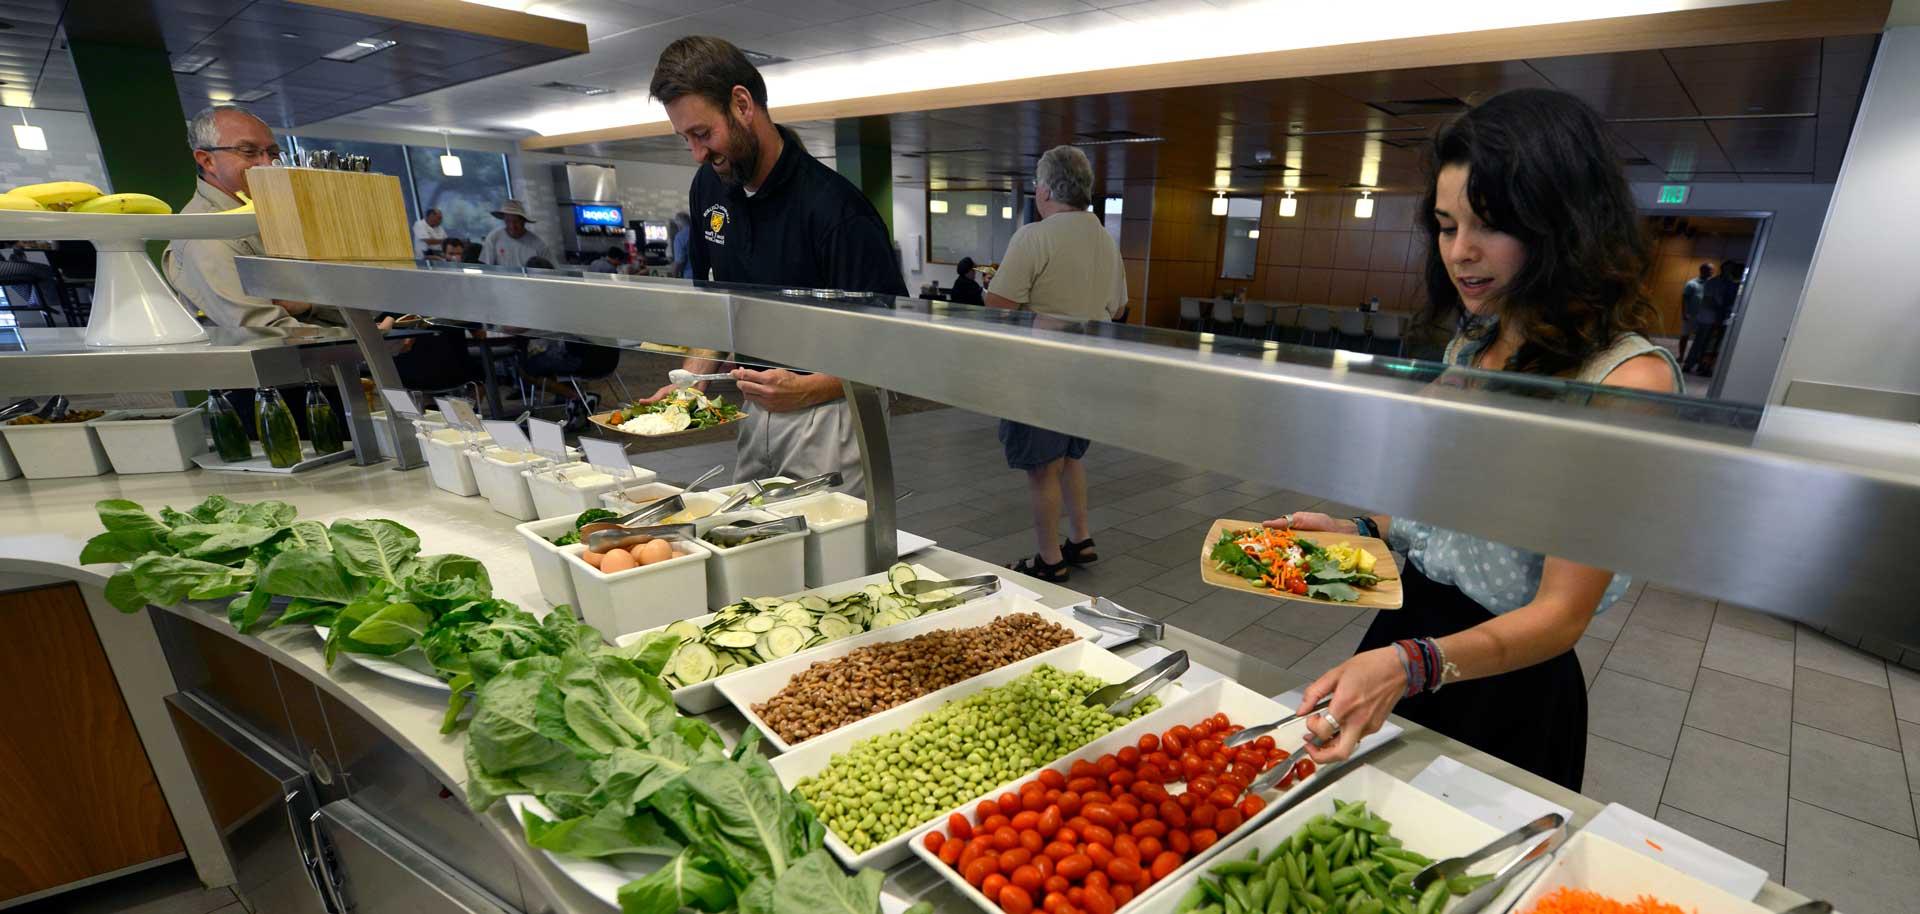 Students, faculty, staff and visitors flock to CC's cafeteria, Rastall Cafe. Some produce at the salad bar is harvested from the student garden. 